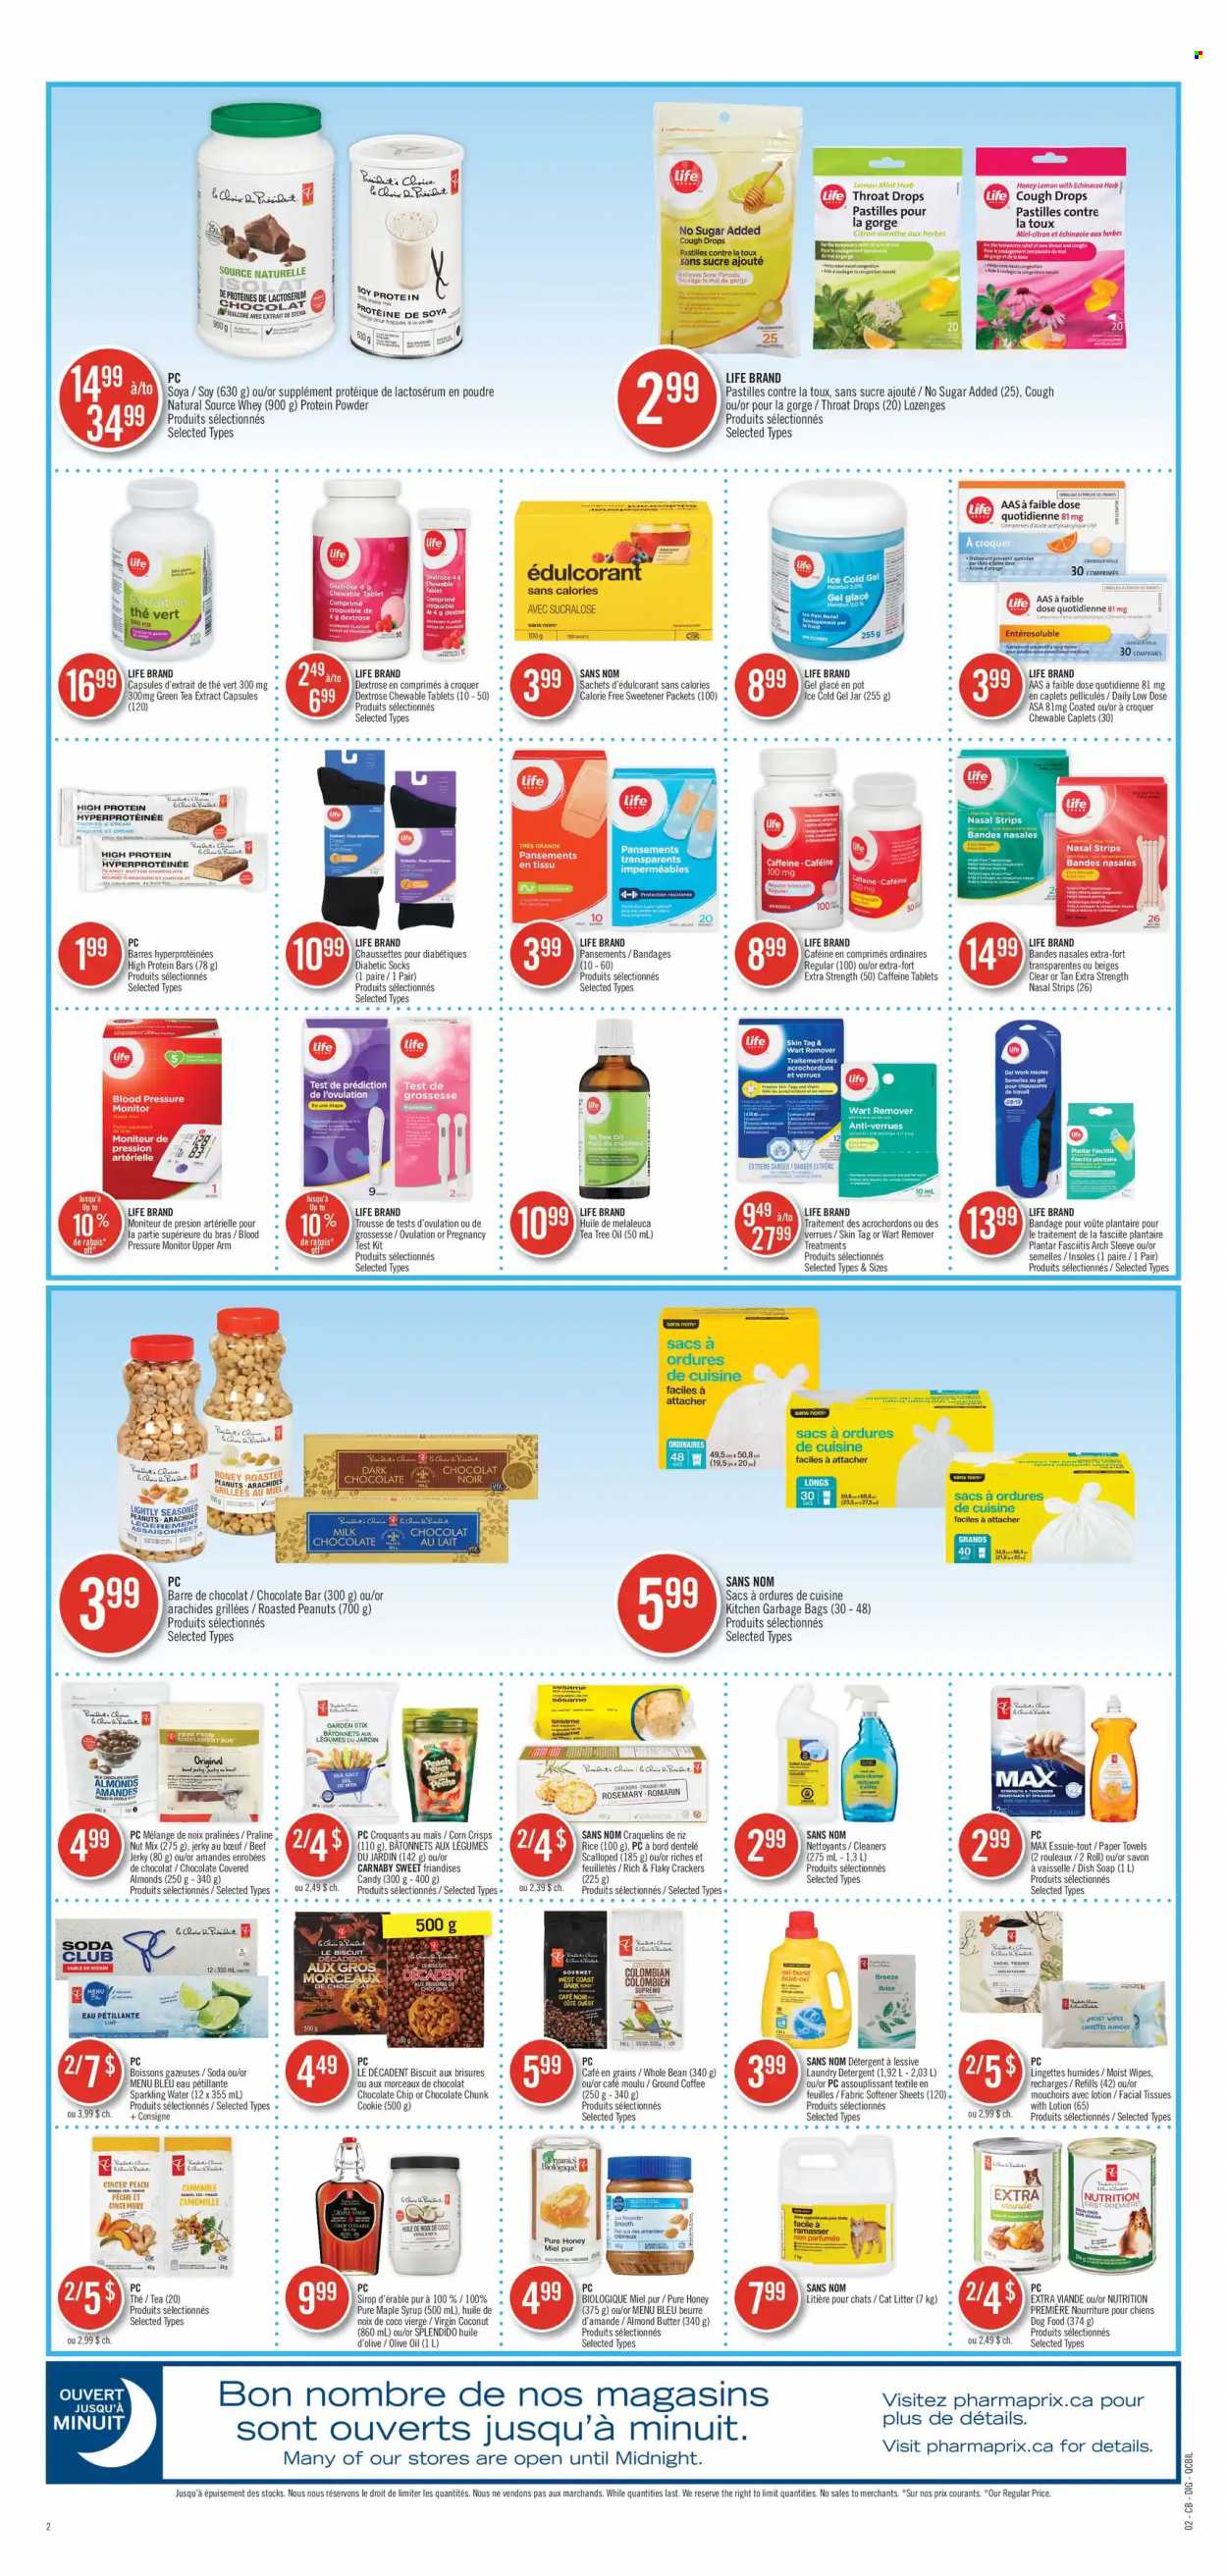 thumbnail - Pharmaprix Flyer - October 16, 2021 - October 22, 2021 - Sales products - tablet, corn, coconut, beef jerky, jerky, almond butter, cookies, milk chocolate, crackers, biscuit, dark chocolate, pastilles, chocolate bar, stevia, sweetener, protein bar, rice, rosemary, olive oil, oil, maple syrup, honey, syrup, almonds, roasted peanuts, peanuts, soda, sparkling water, green tea, tea, coffee, ground coffee, wipes, tissues, kitchen towels, paper towels, fabric softener, laundry detergent, soap, facial tissues, body lotion, Eclat, bag, pot, jar, pressure monitor, whey protein, tea tree oil, cough drops, Low Dose, detergent. Page 12.